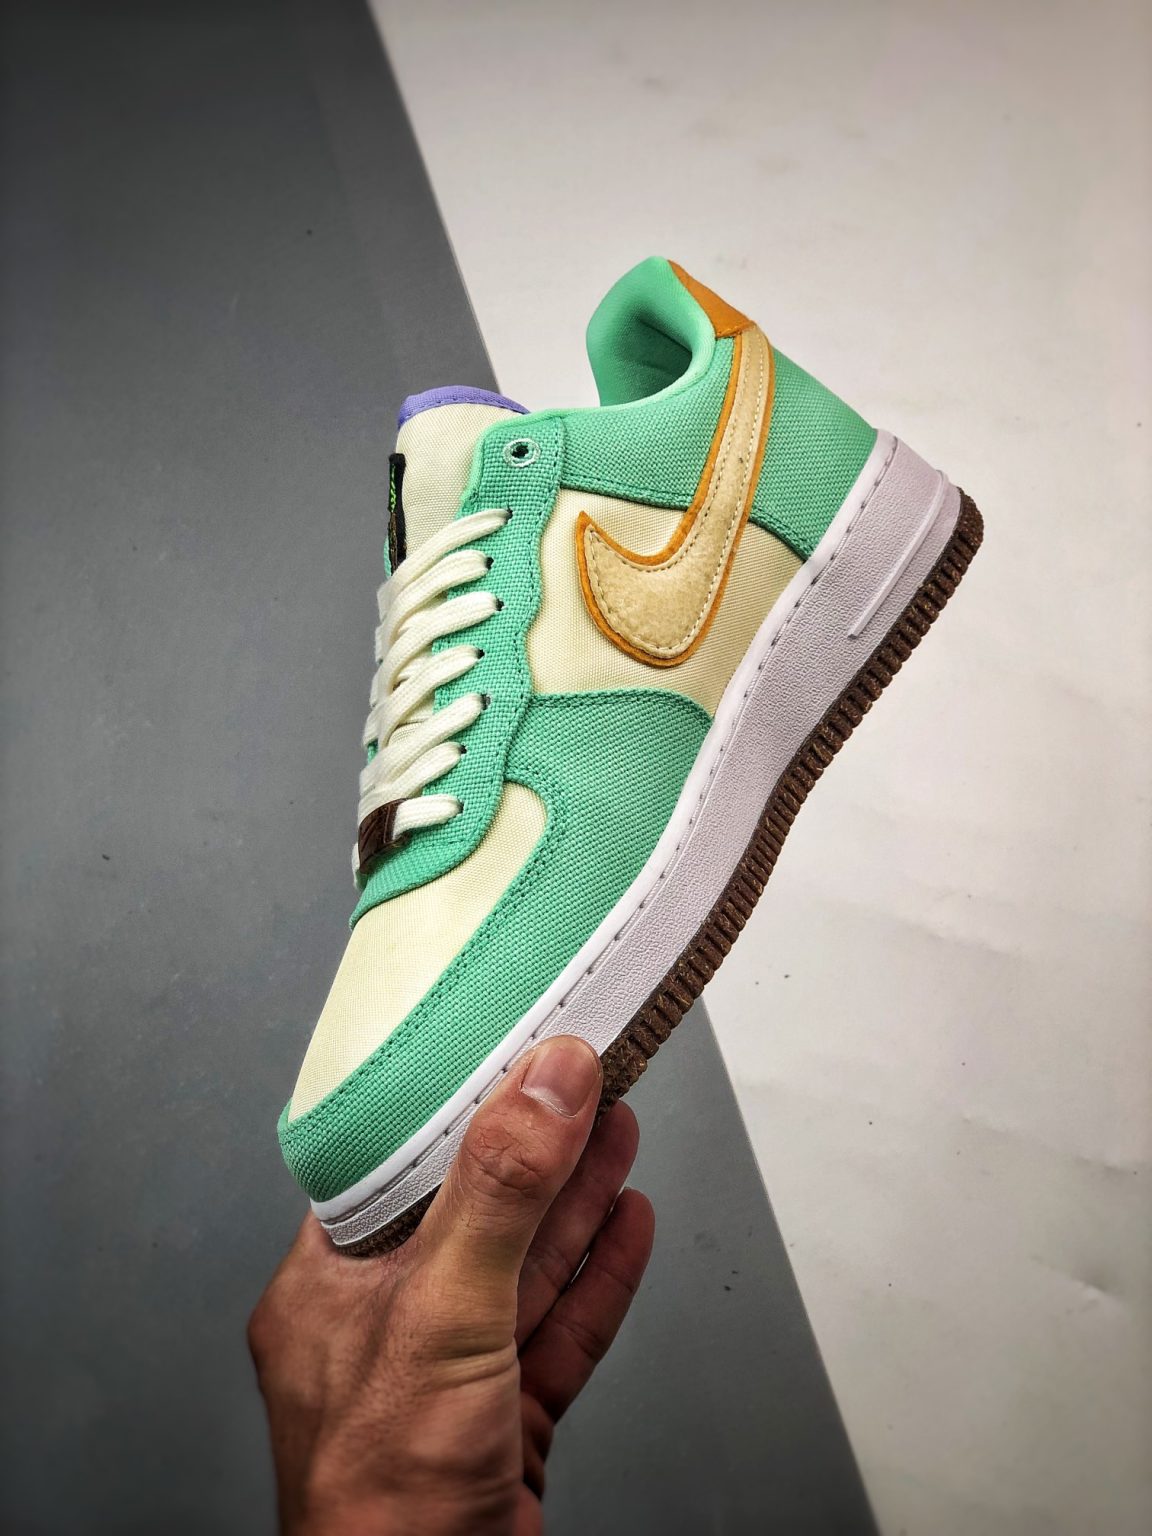 Nike Air Force 1 Low “Happy Pineapple” Green Glow CZ0268-300 For Sale ...